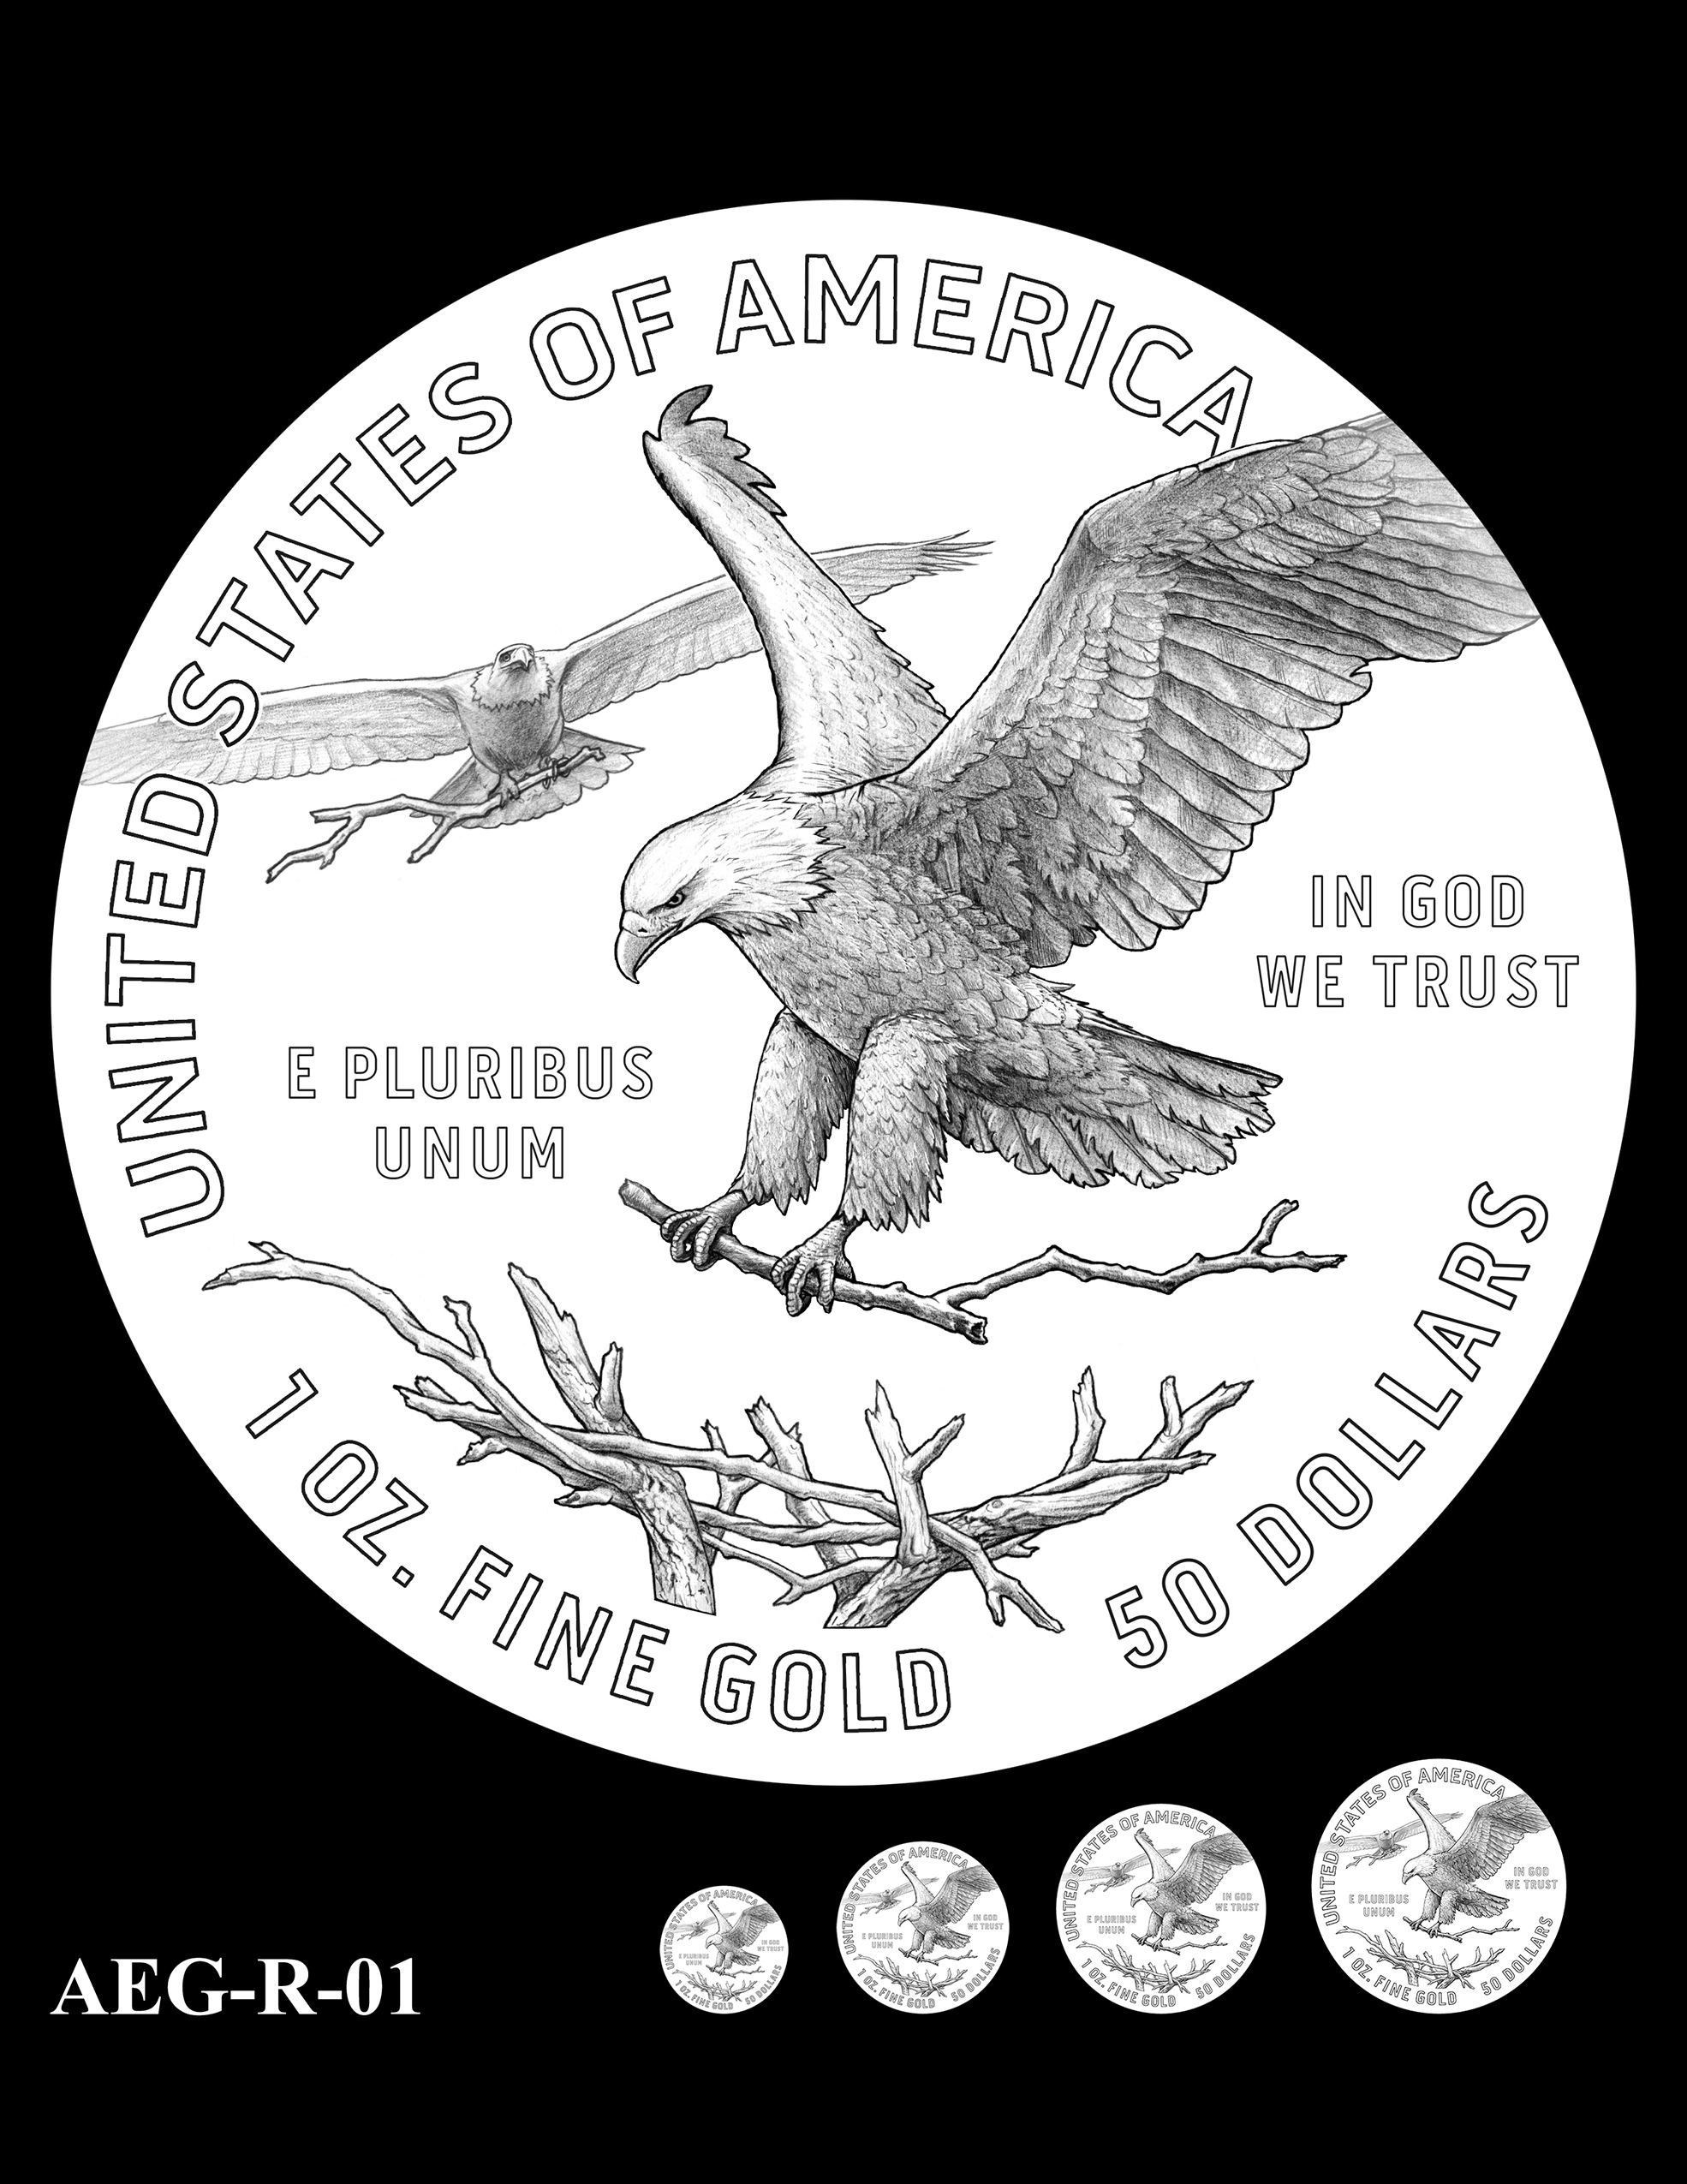 AEG-R-01 -- American Eagle Proof and Bullion Gold Coin - Reverse